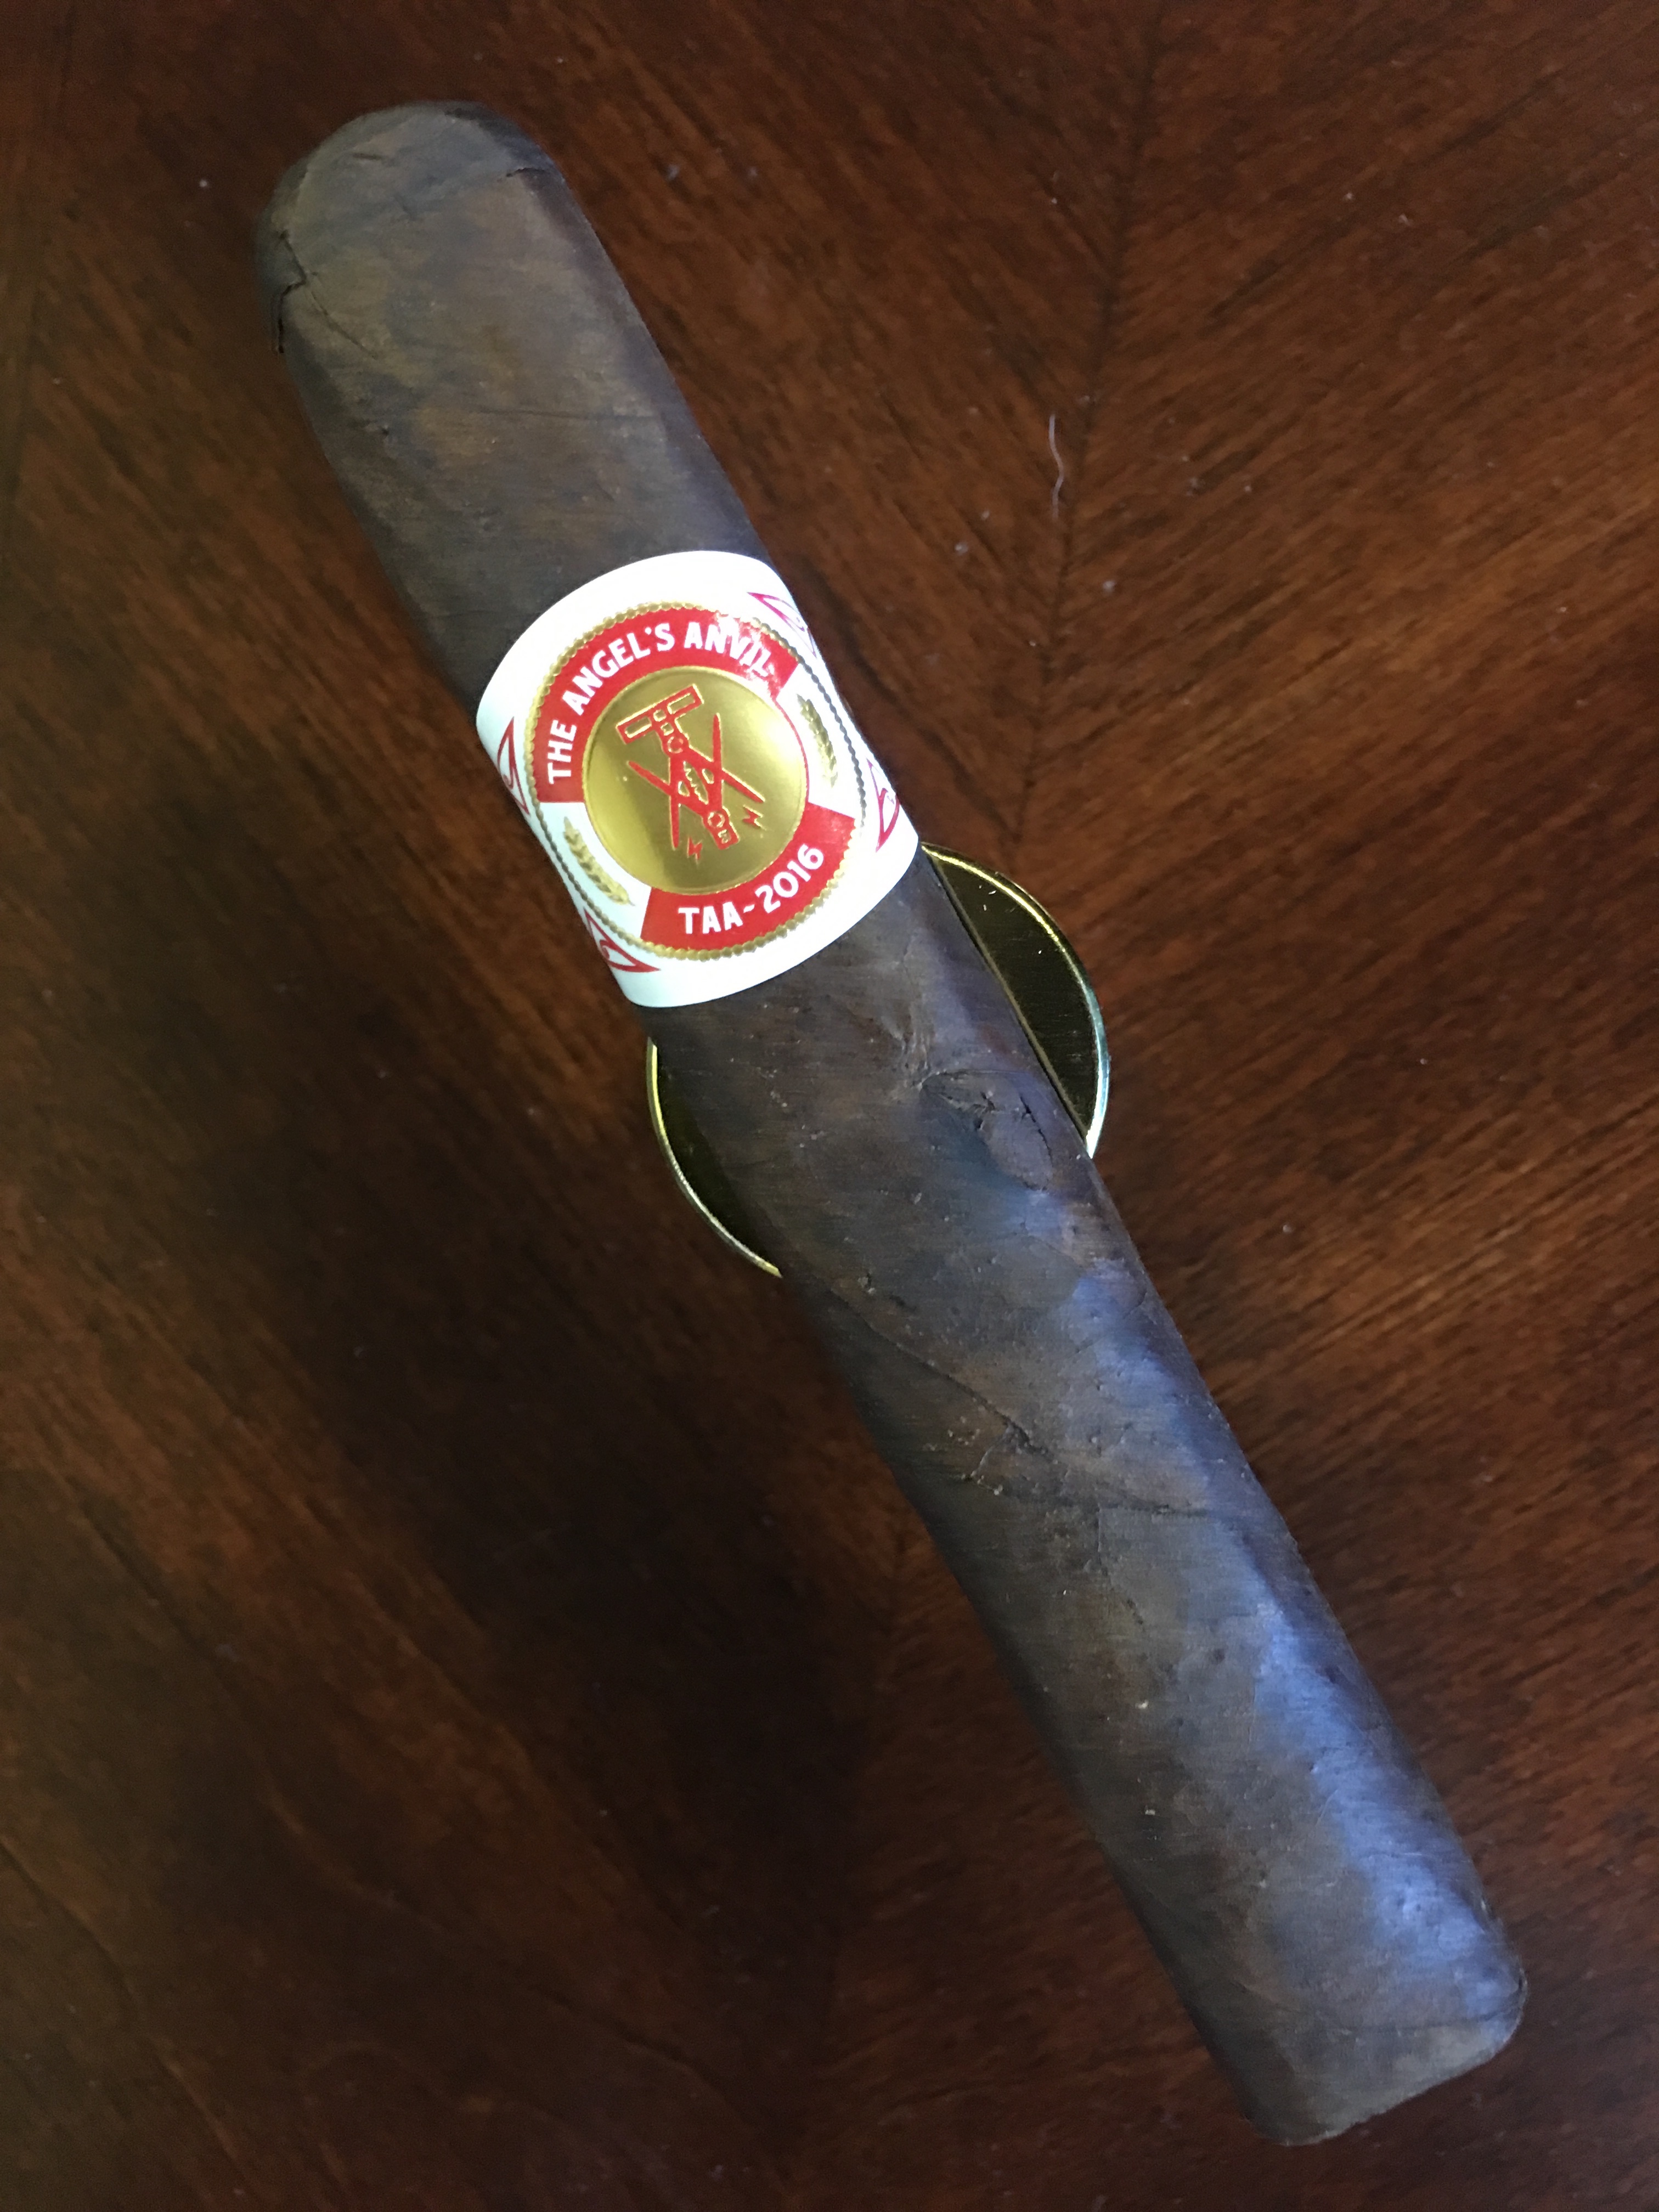 Crowned Heads The Angel’s Anvil TAA 2016